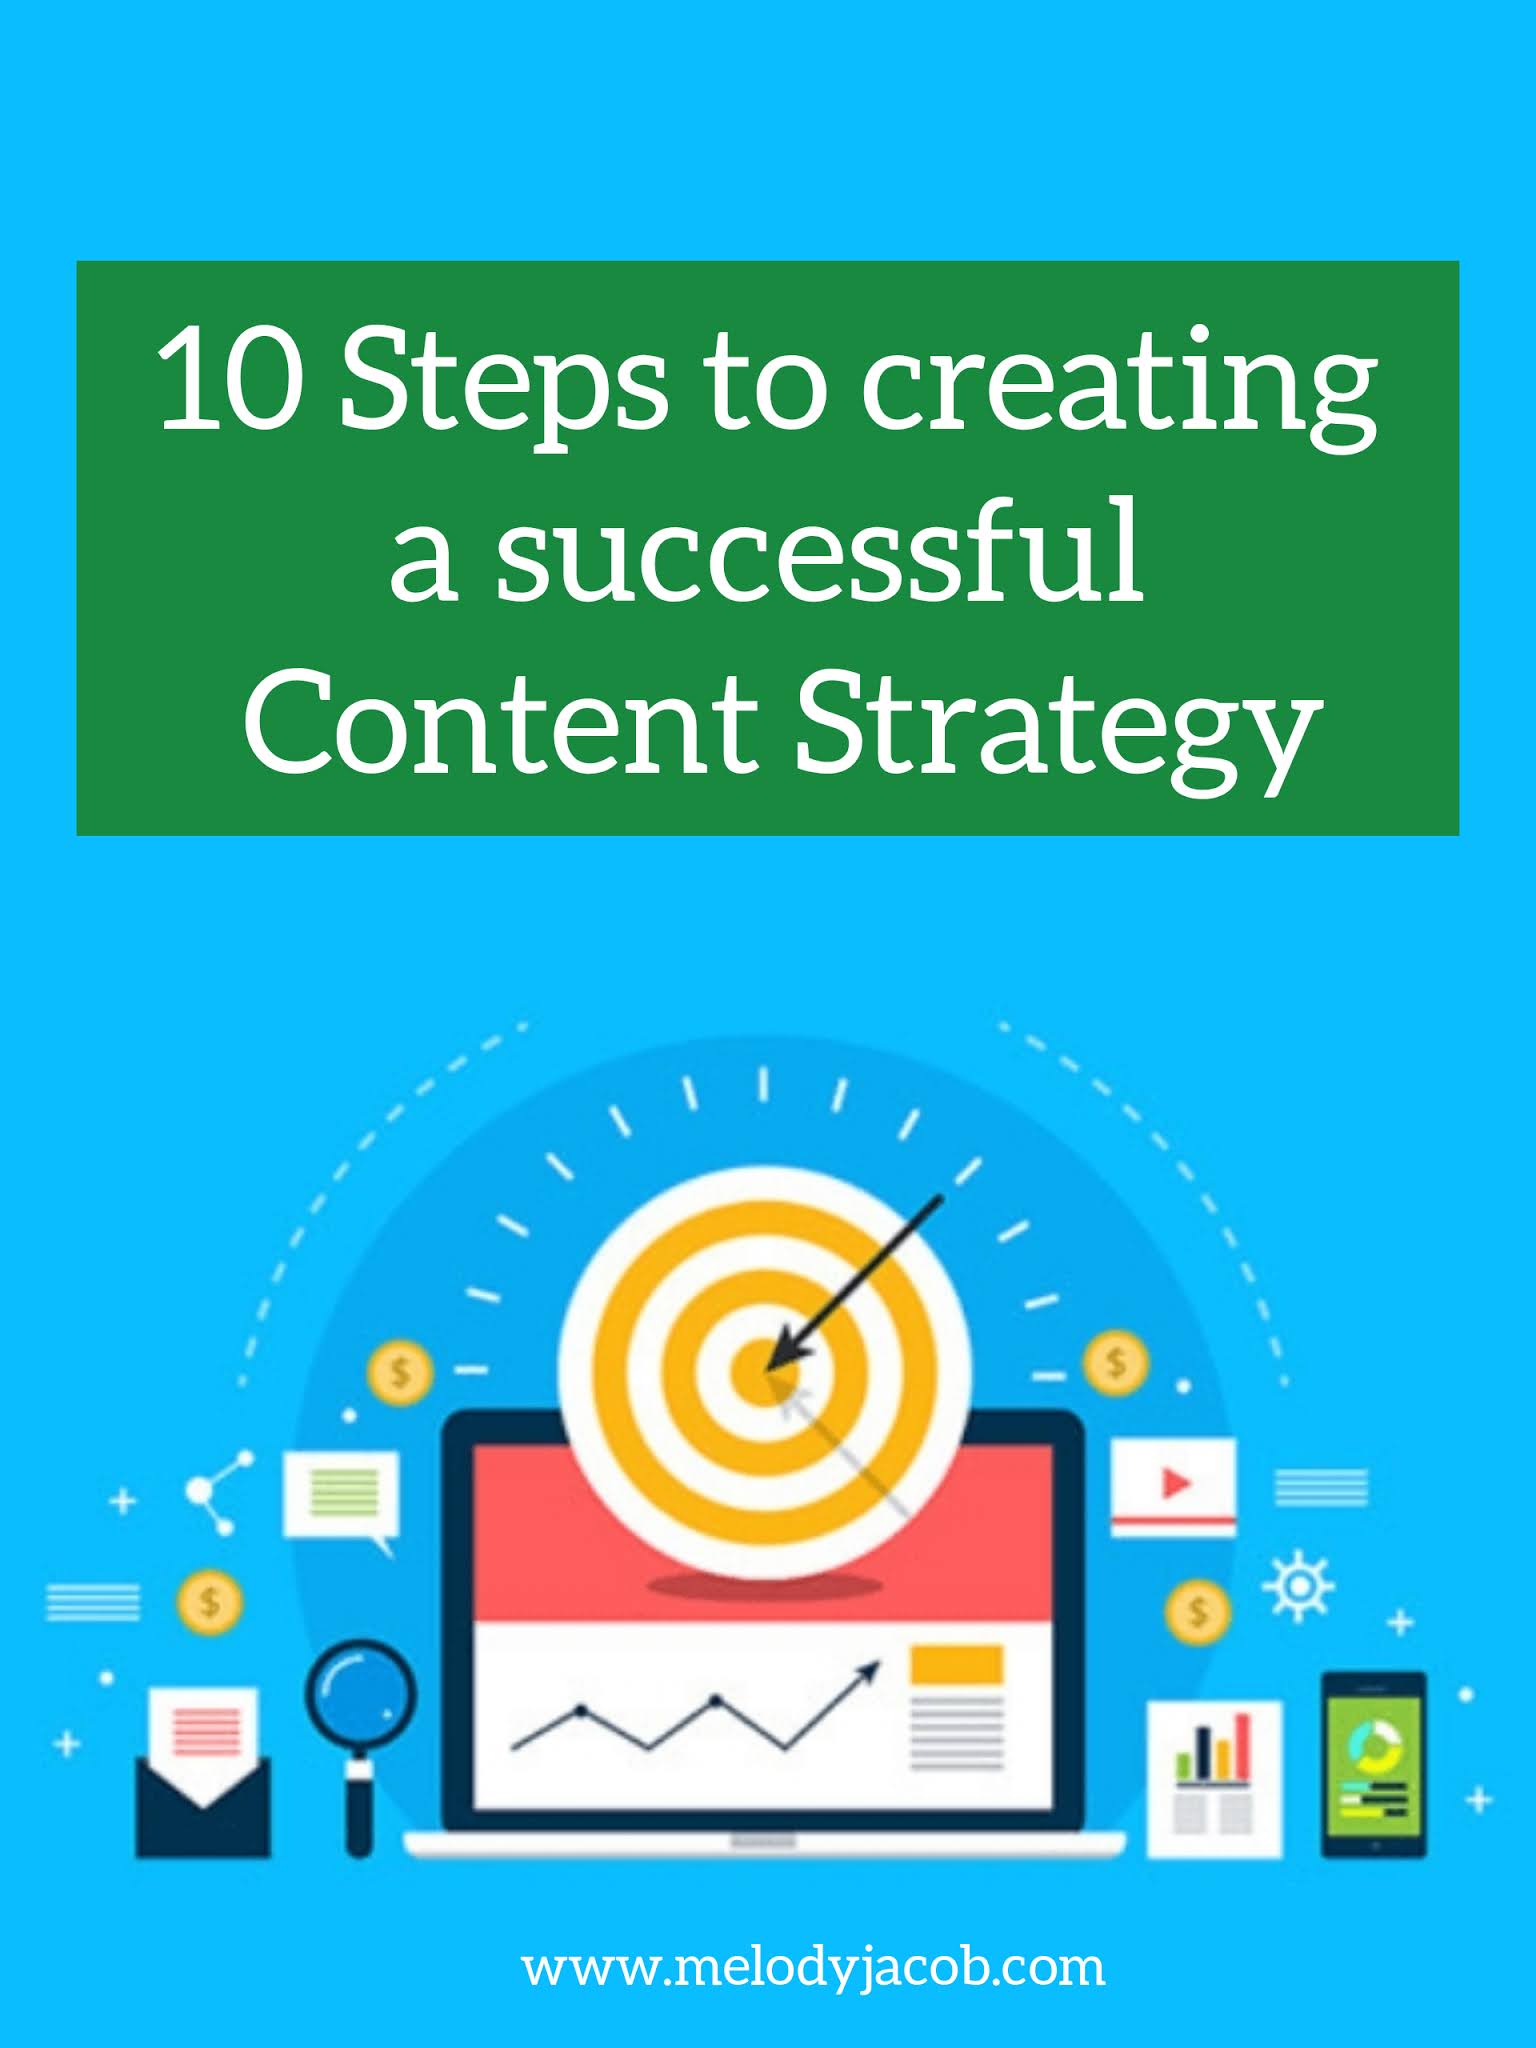 10 Steps to building a Successful Content Strategy